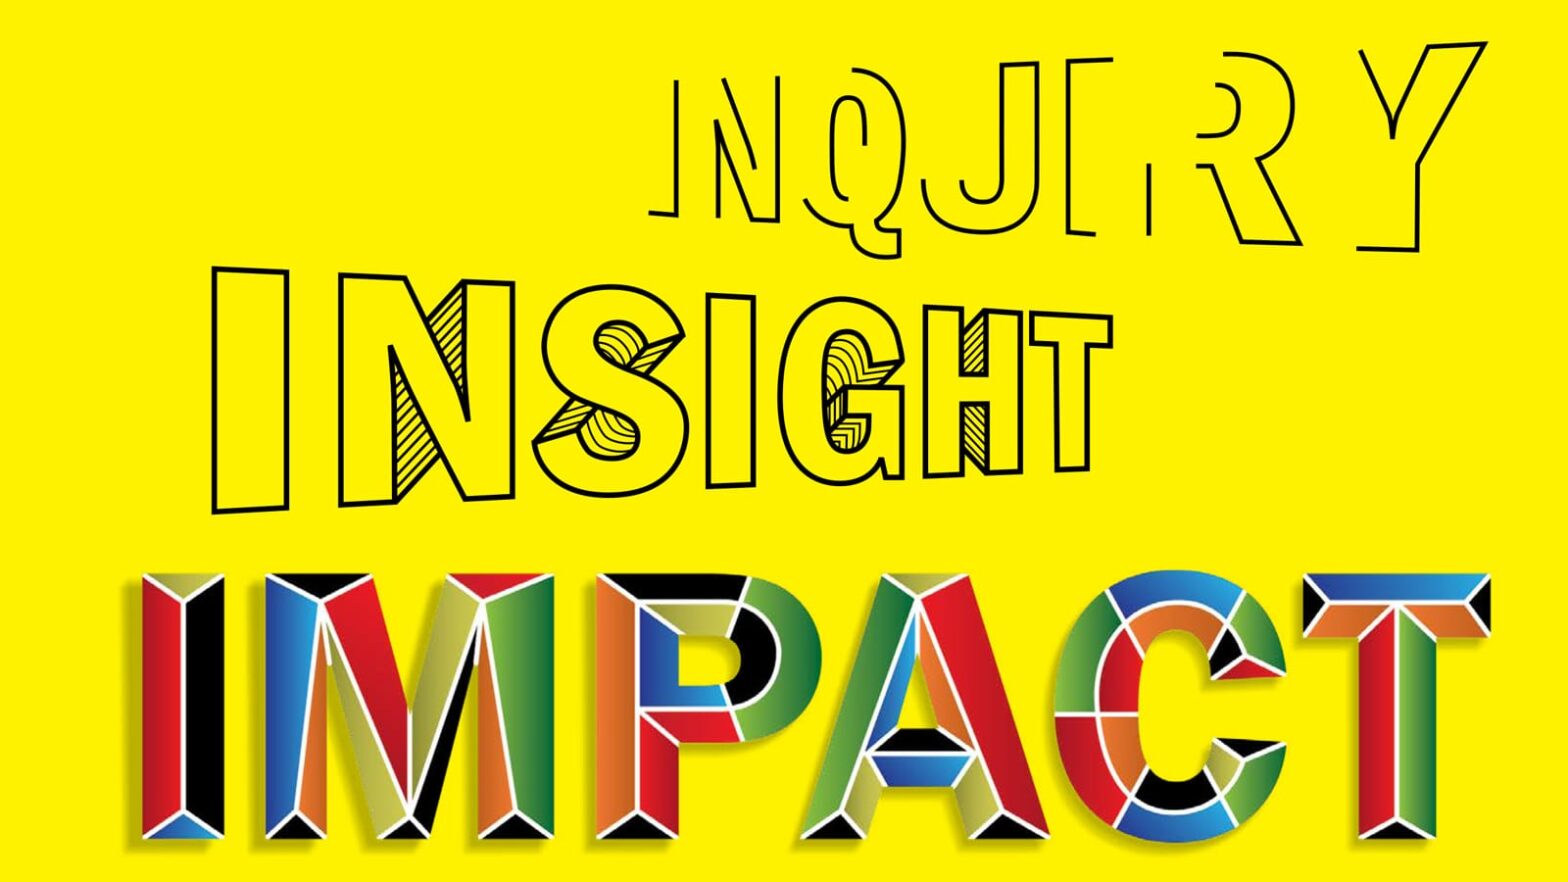 Graphic treatment of the words "Inquiry Insight Impact" on yellow background